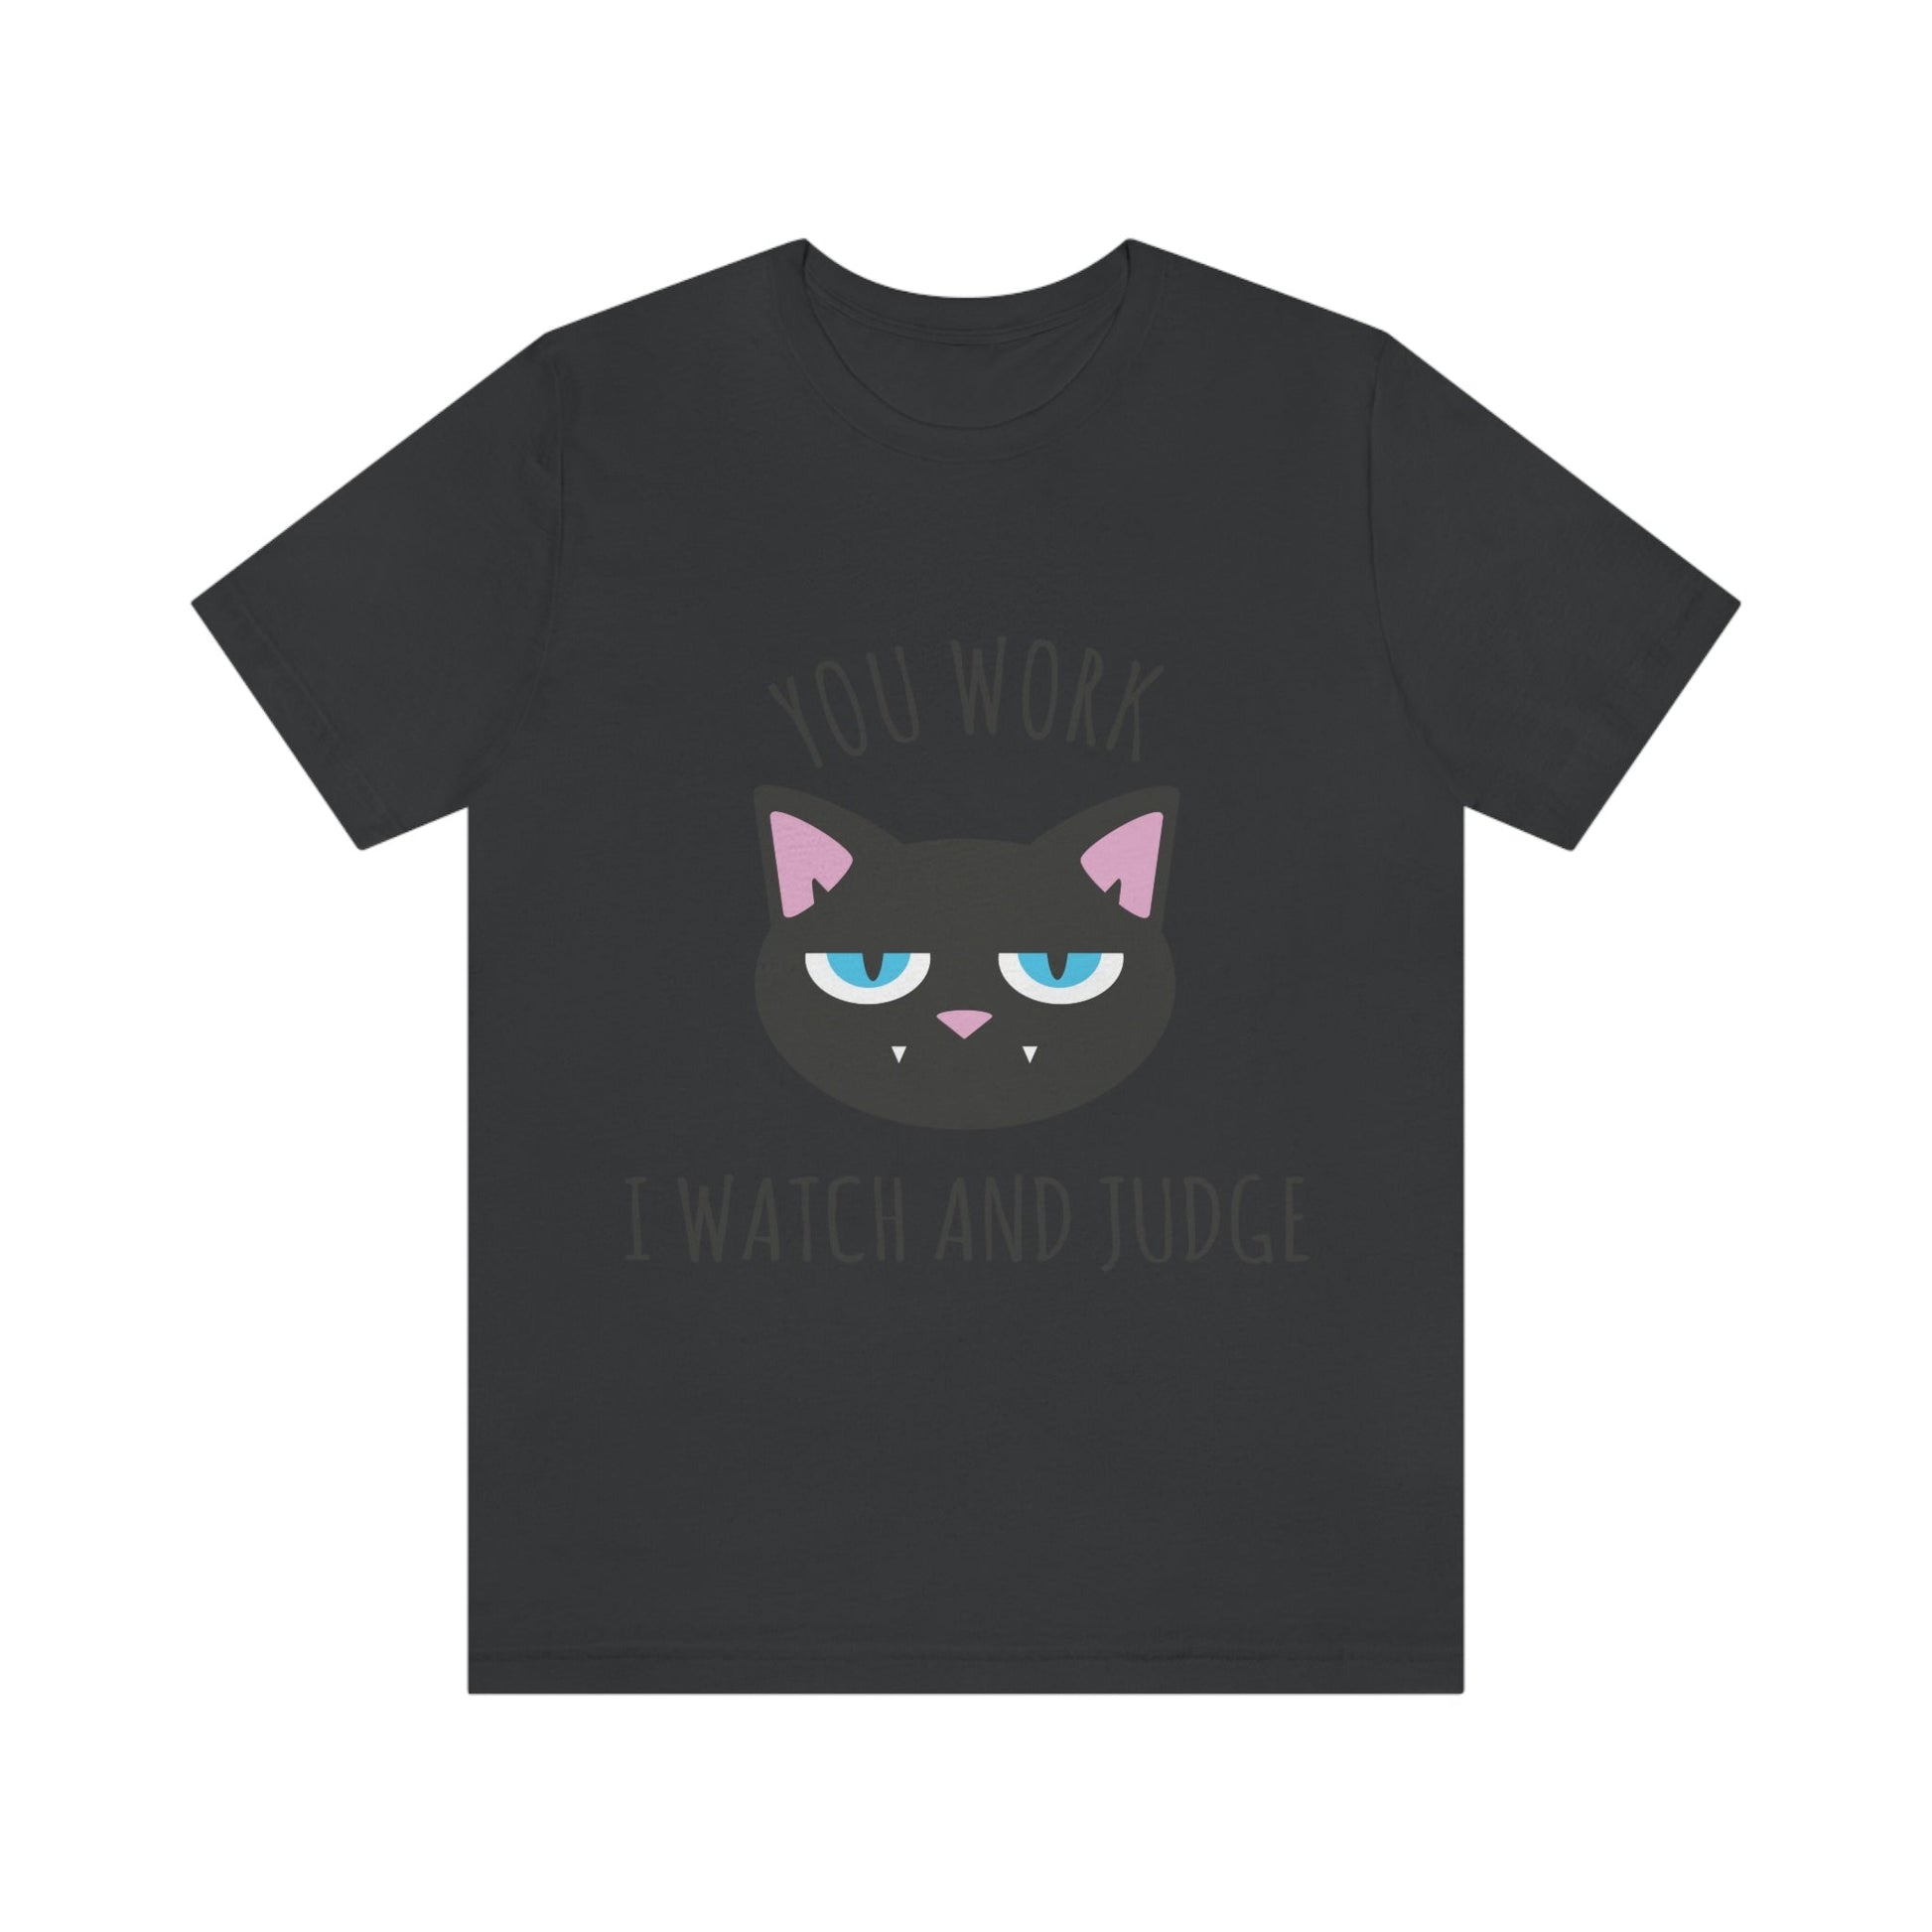 You Work I Watch and Judge Cat Funny Cats Memes Unisex Jersey Short Sleeve T-Shirt Ichaku [Perfect Gifts Selection]